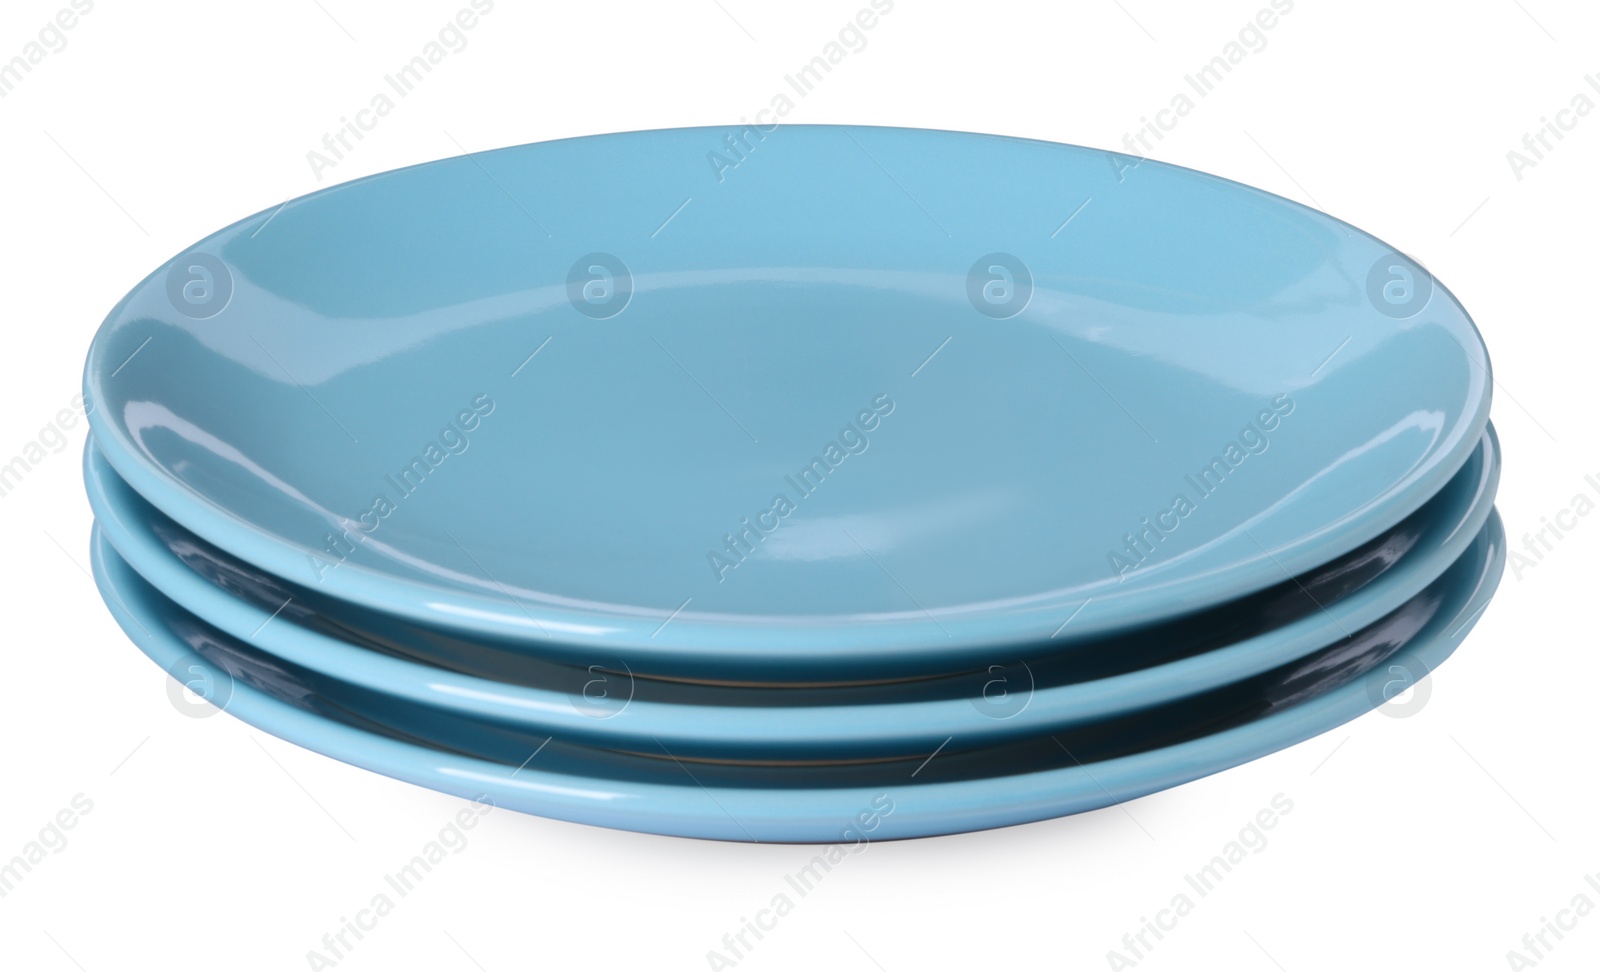 Photo of Three clean ceramic plates isolated on white